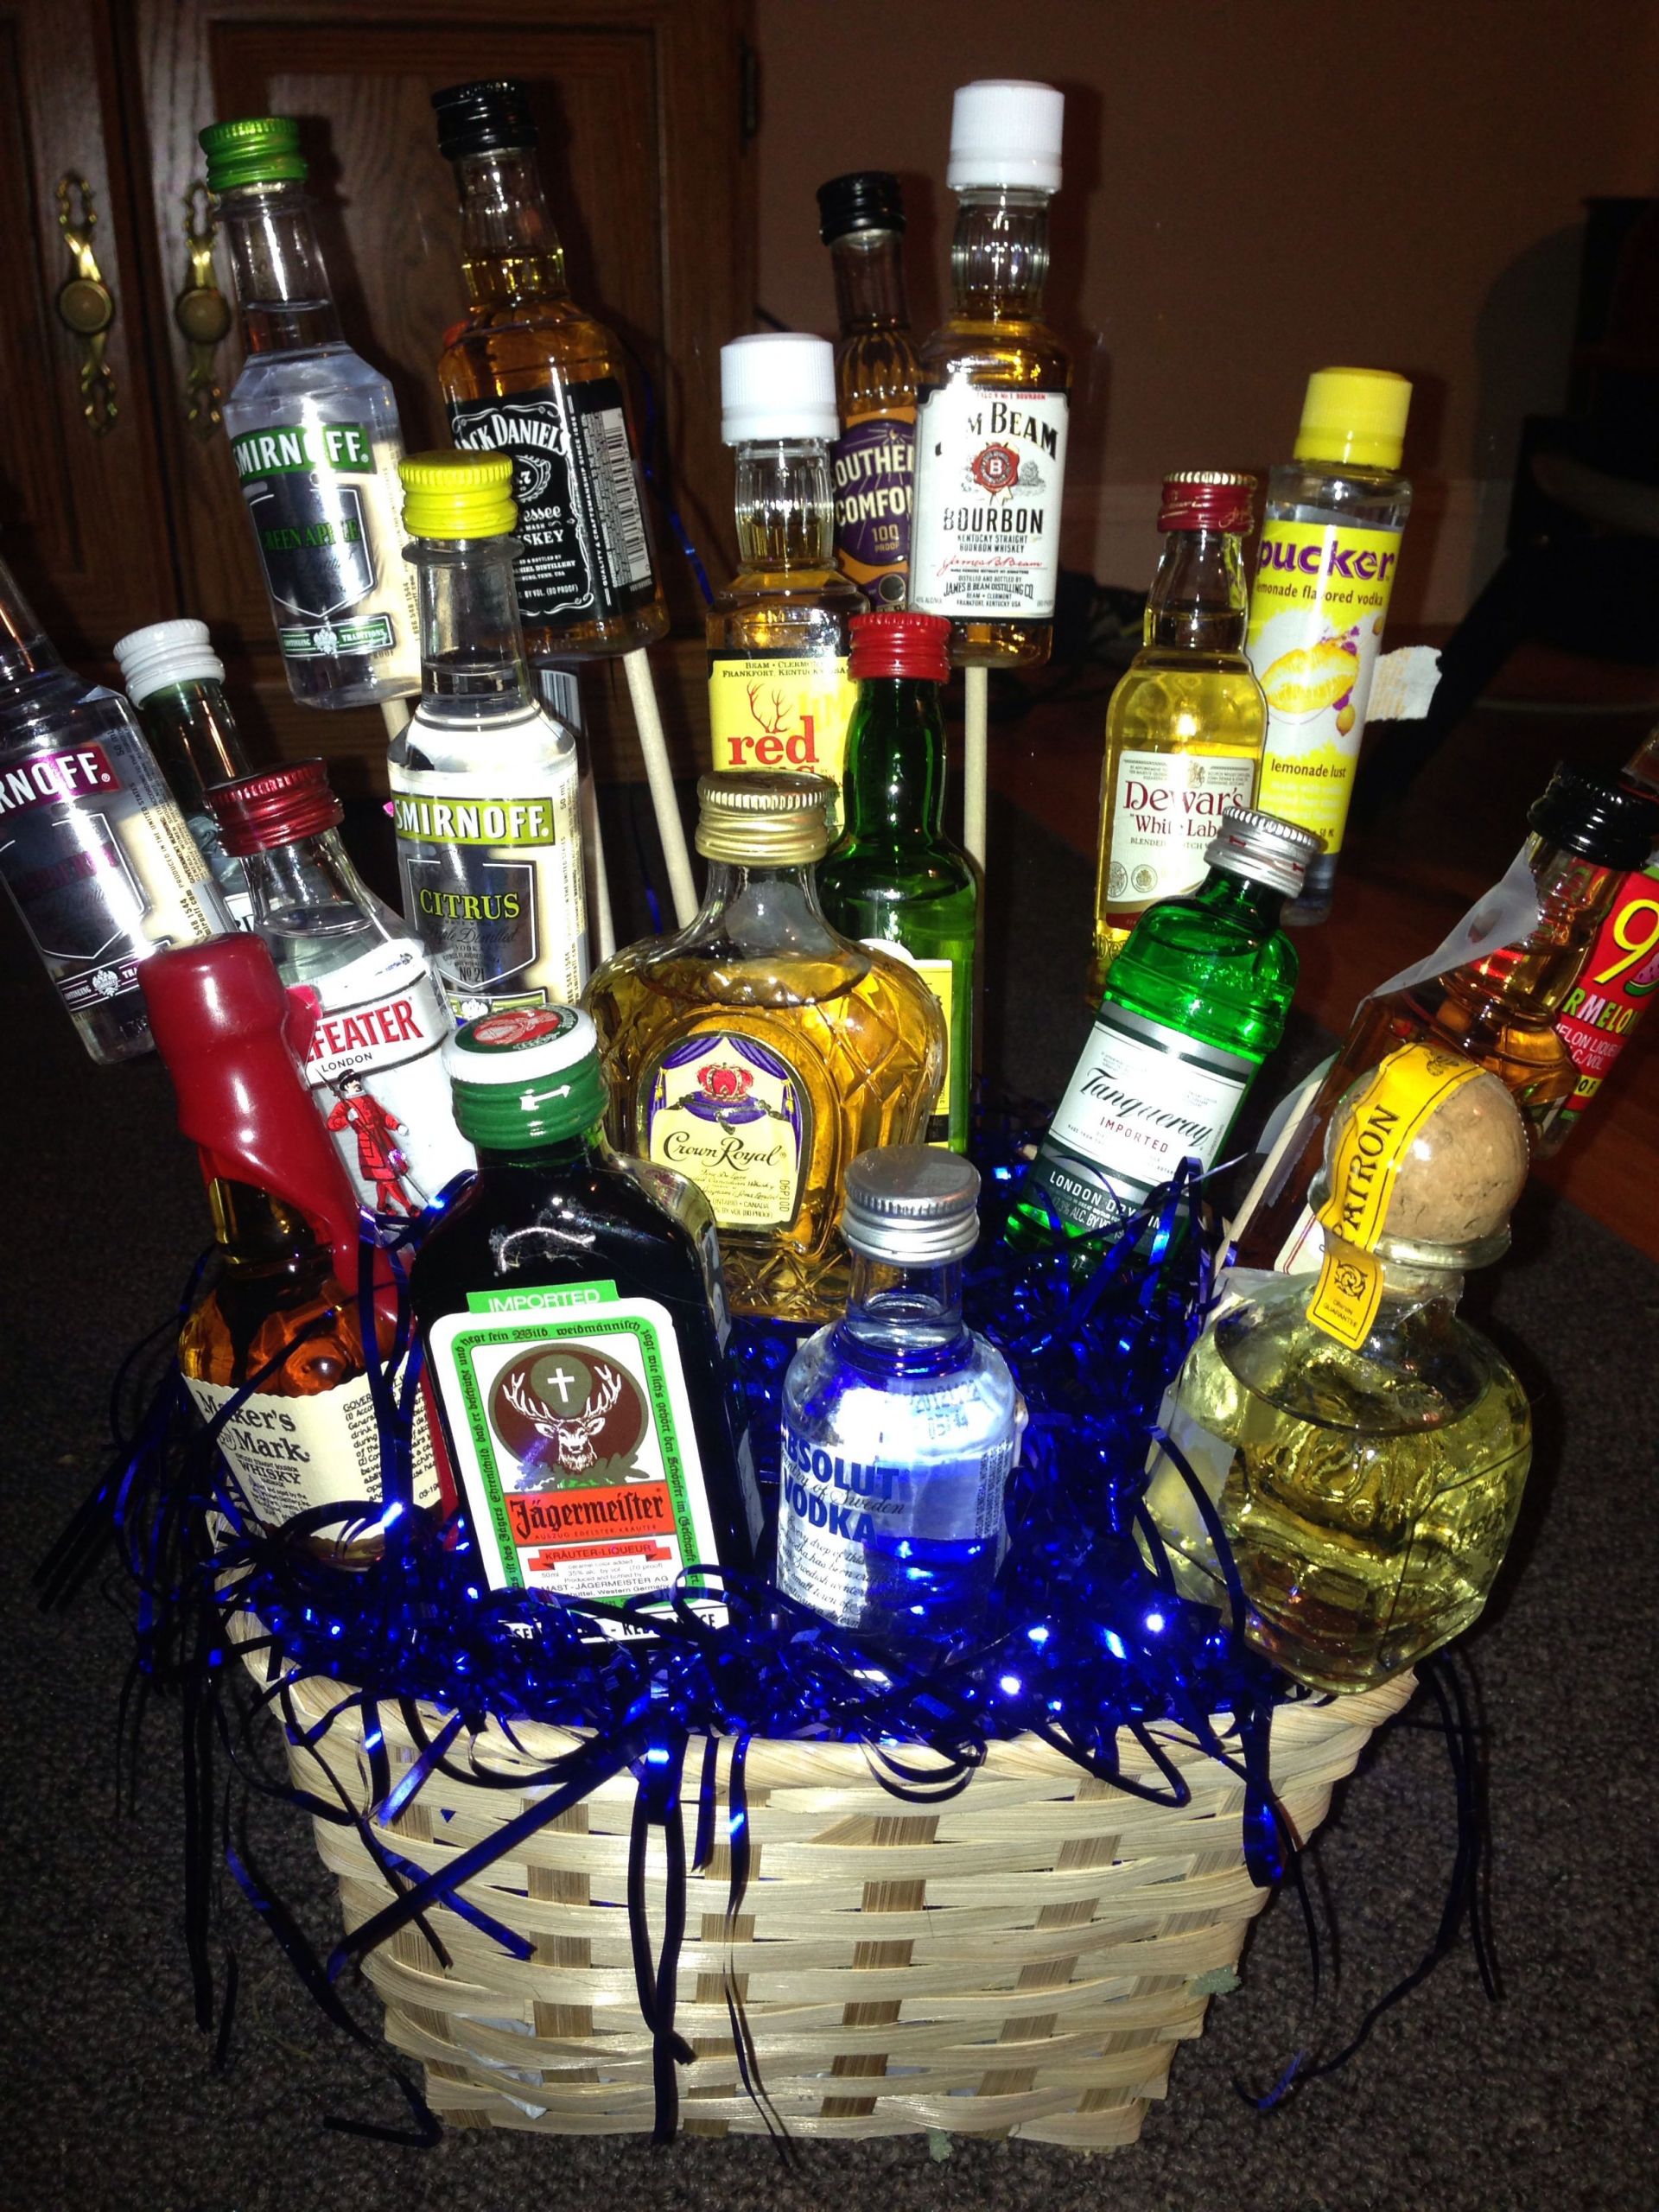 21St Birthday Gift Ideas For Brother
 My Baby Brothers 21st Birthday Present 21 little bottles